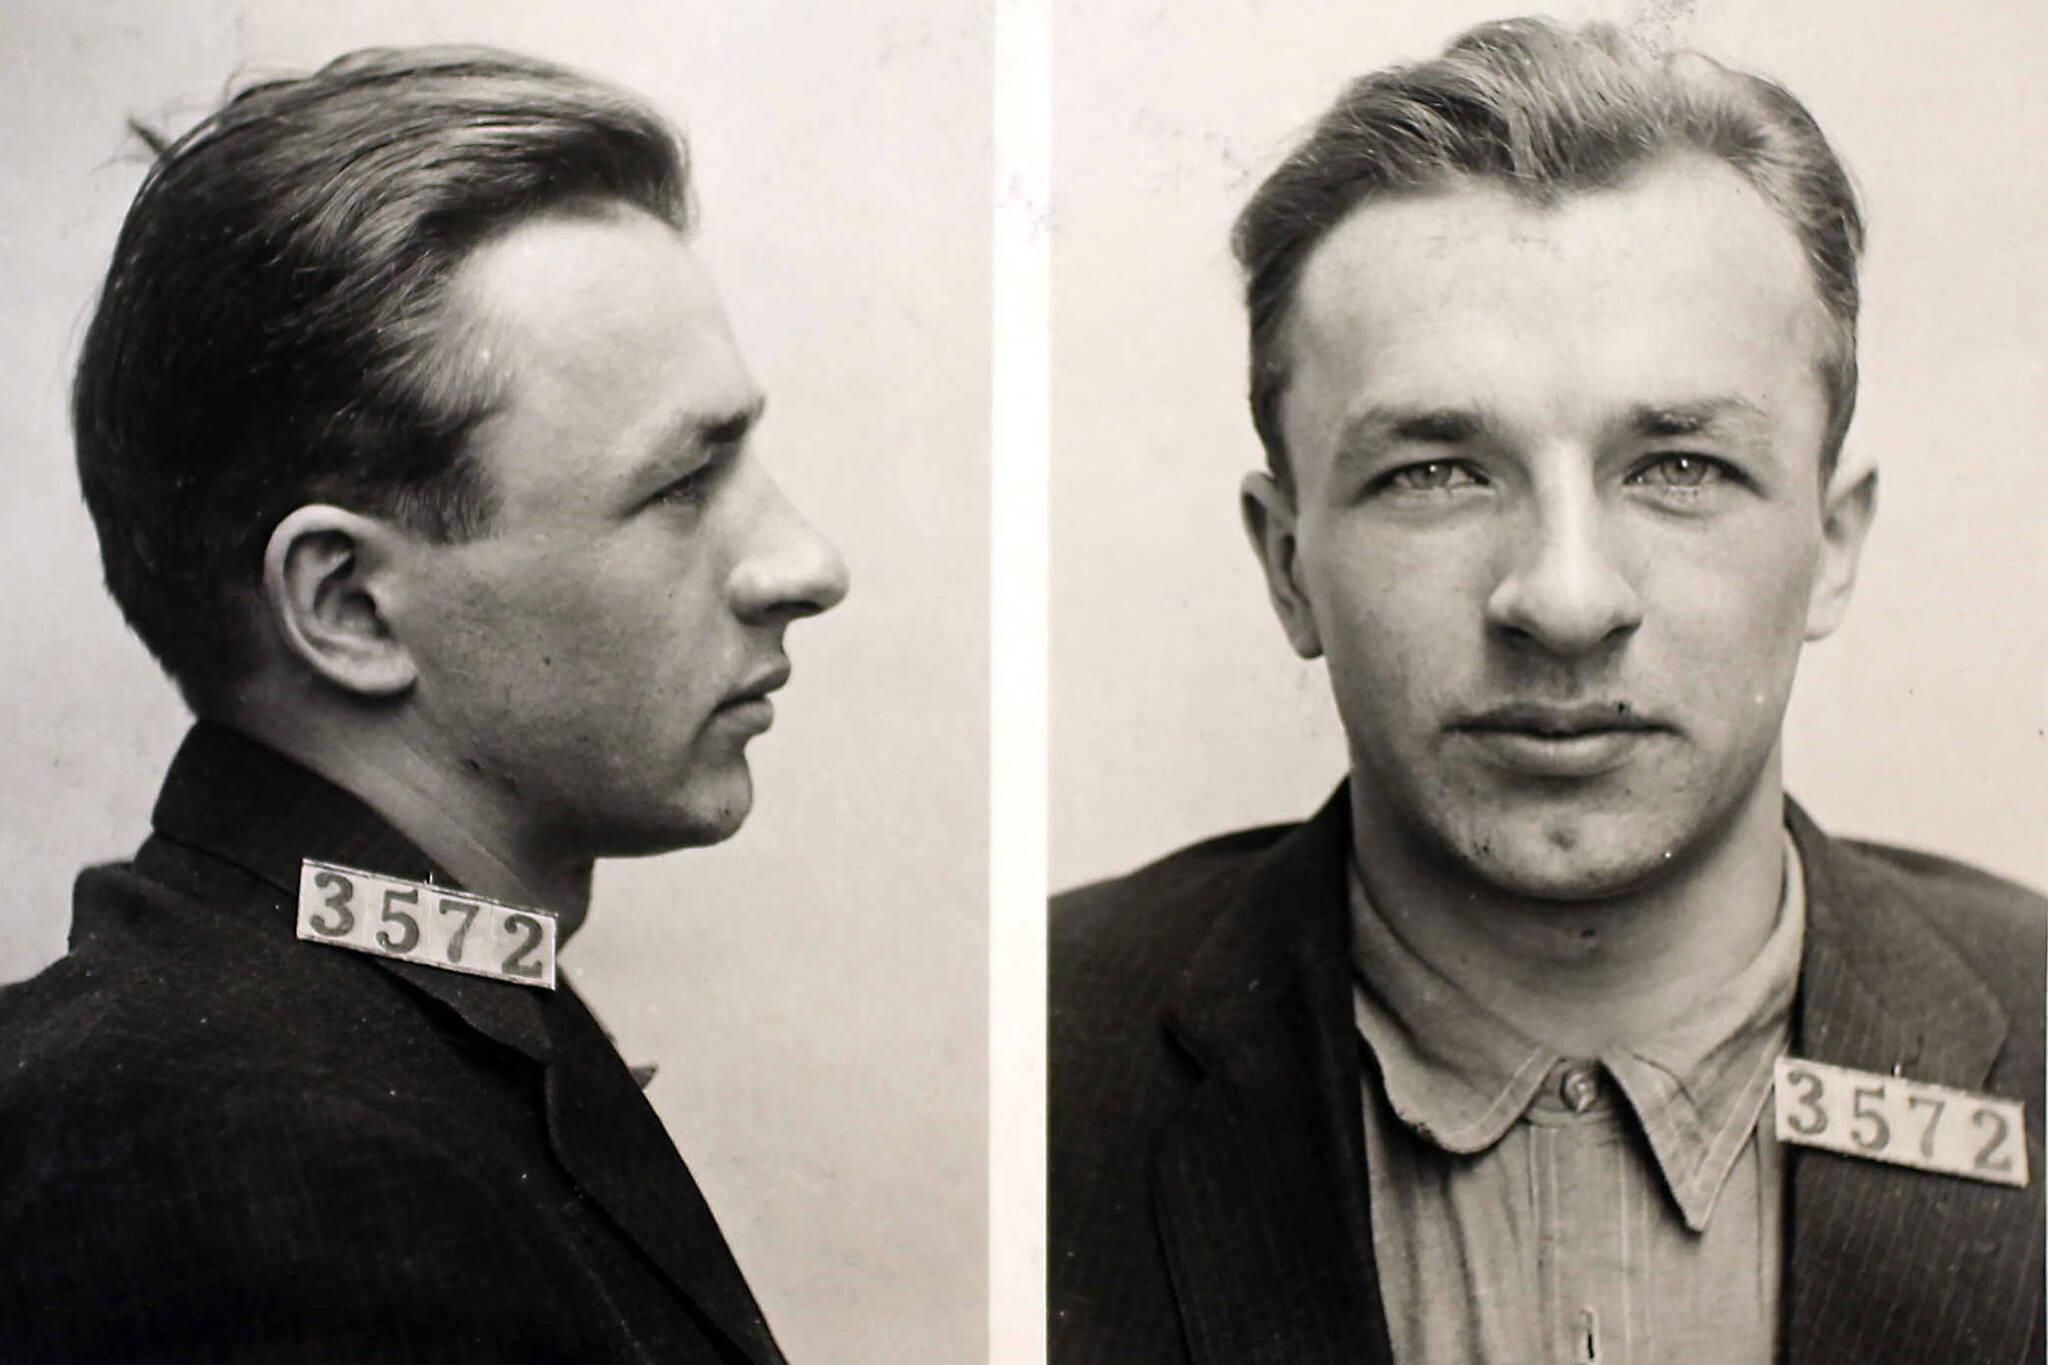 After Pres. Woodrow Wilson commuted his death sentence to life in prison, William Dempsey (inmate #3572) was delivered from Alaska to the federal penitentiary on McNeil Island, Wash. These were his intake photos. (Photo courtesy of the University of Alaska Fairbanks archives)